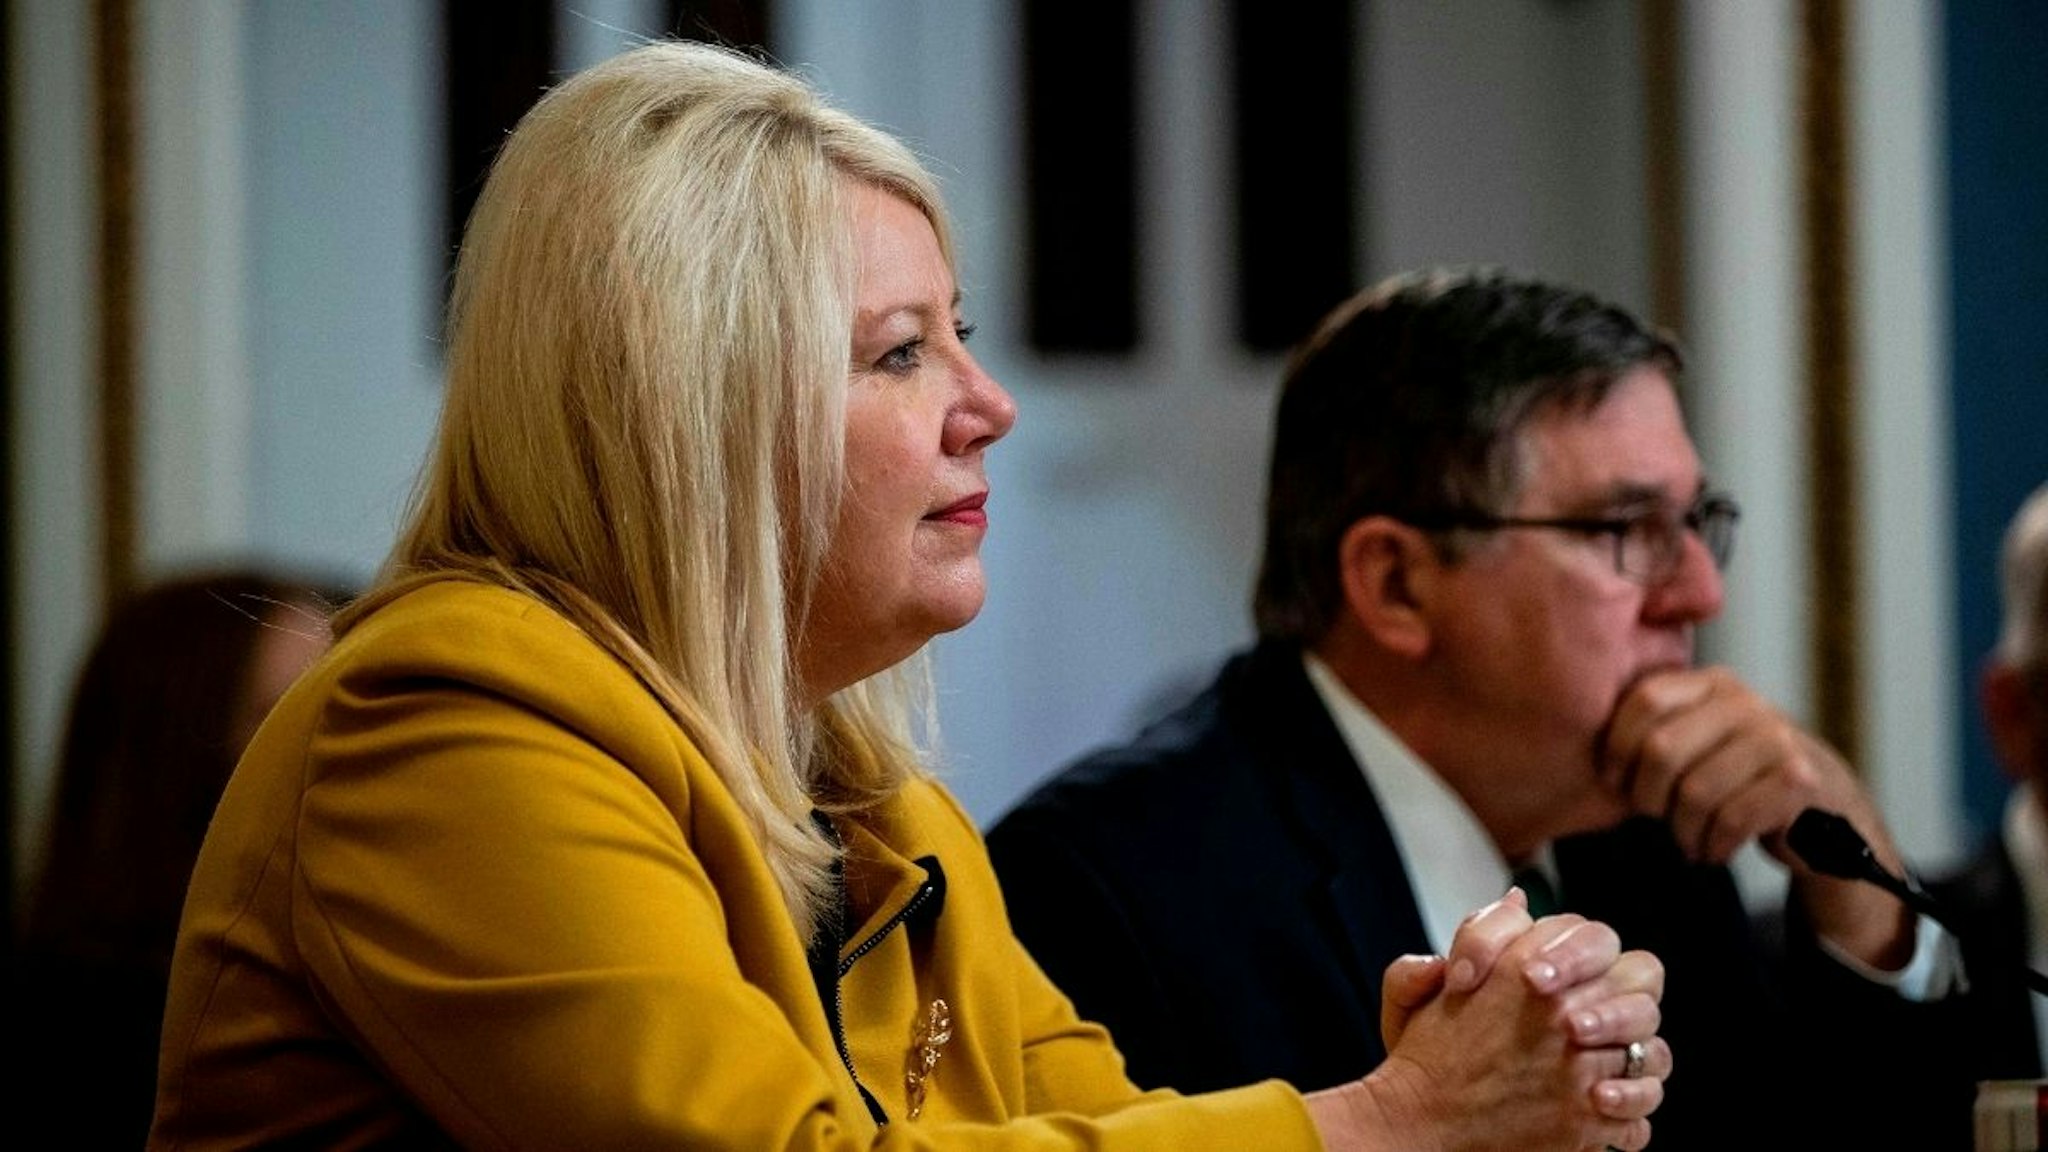 Rep. Debbie Lesko (R-AZ) speaks during a House Rules Committee hearing on the impeachment against President Donald Trump, December 17, 2019, on Capitol Hill in Washington, DC.